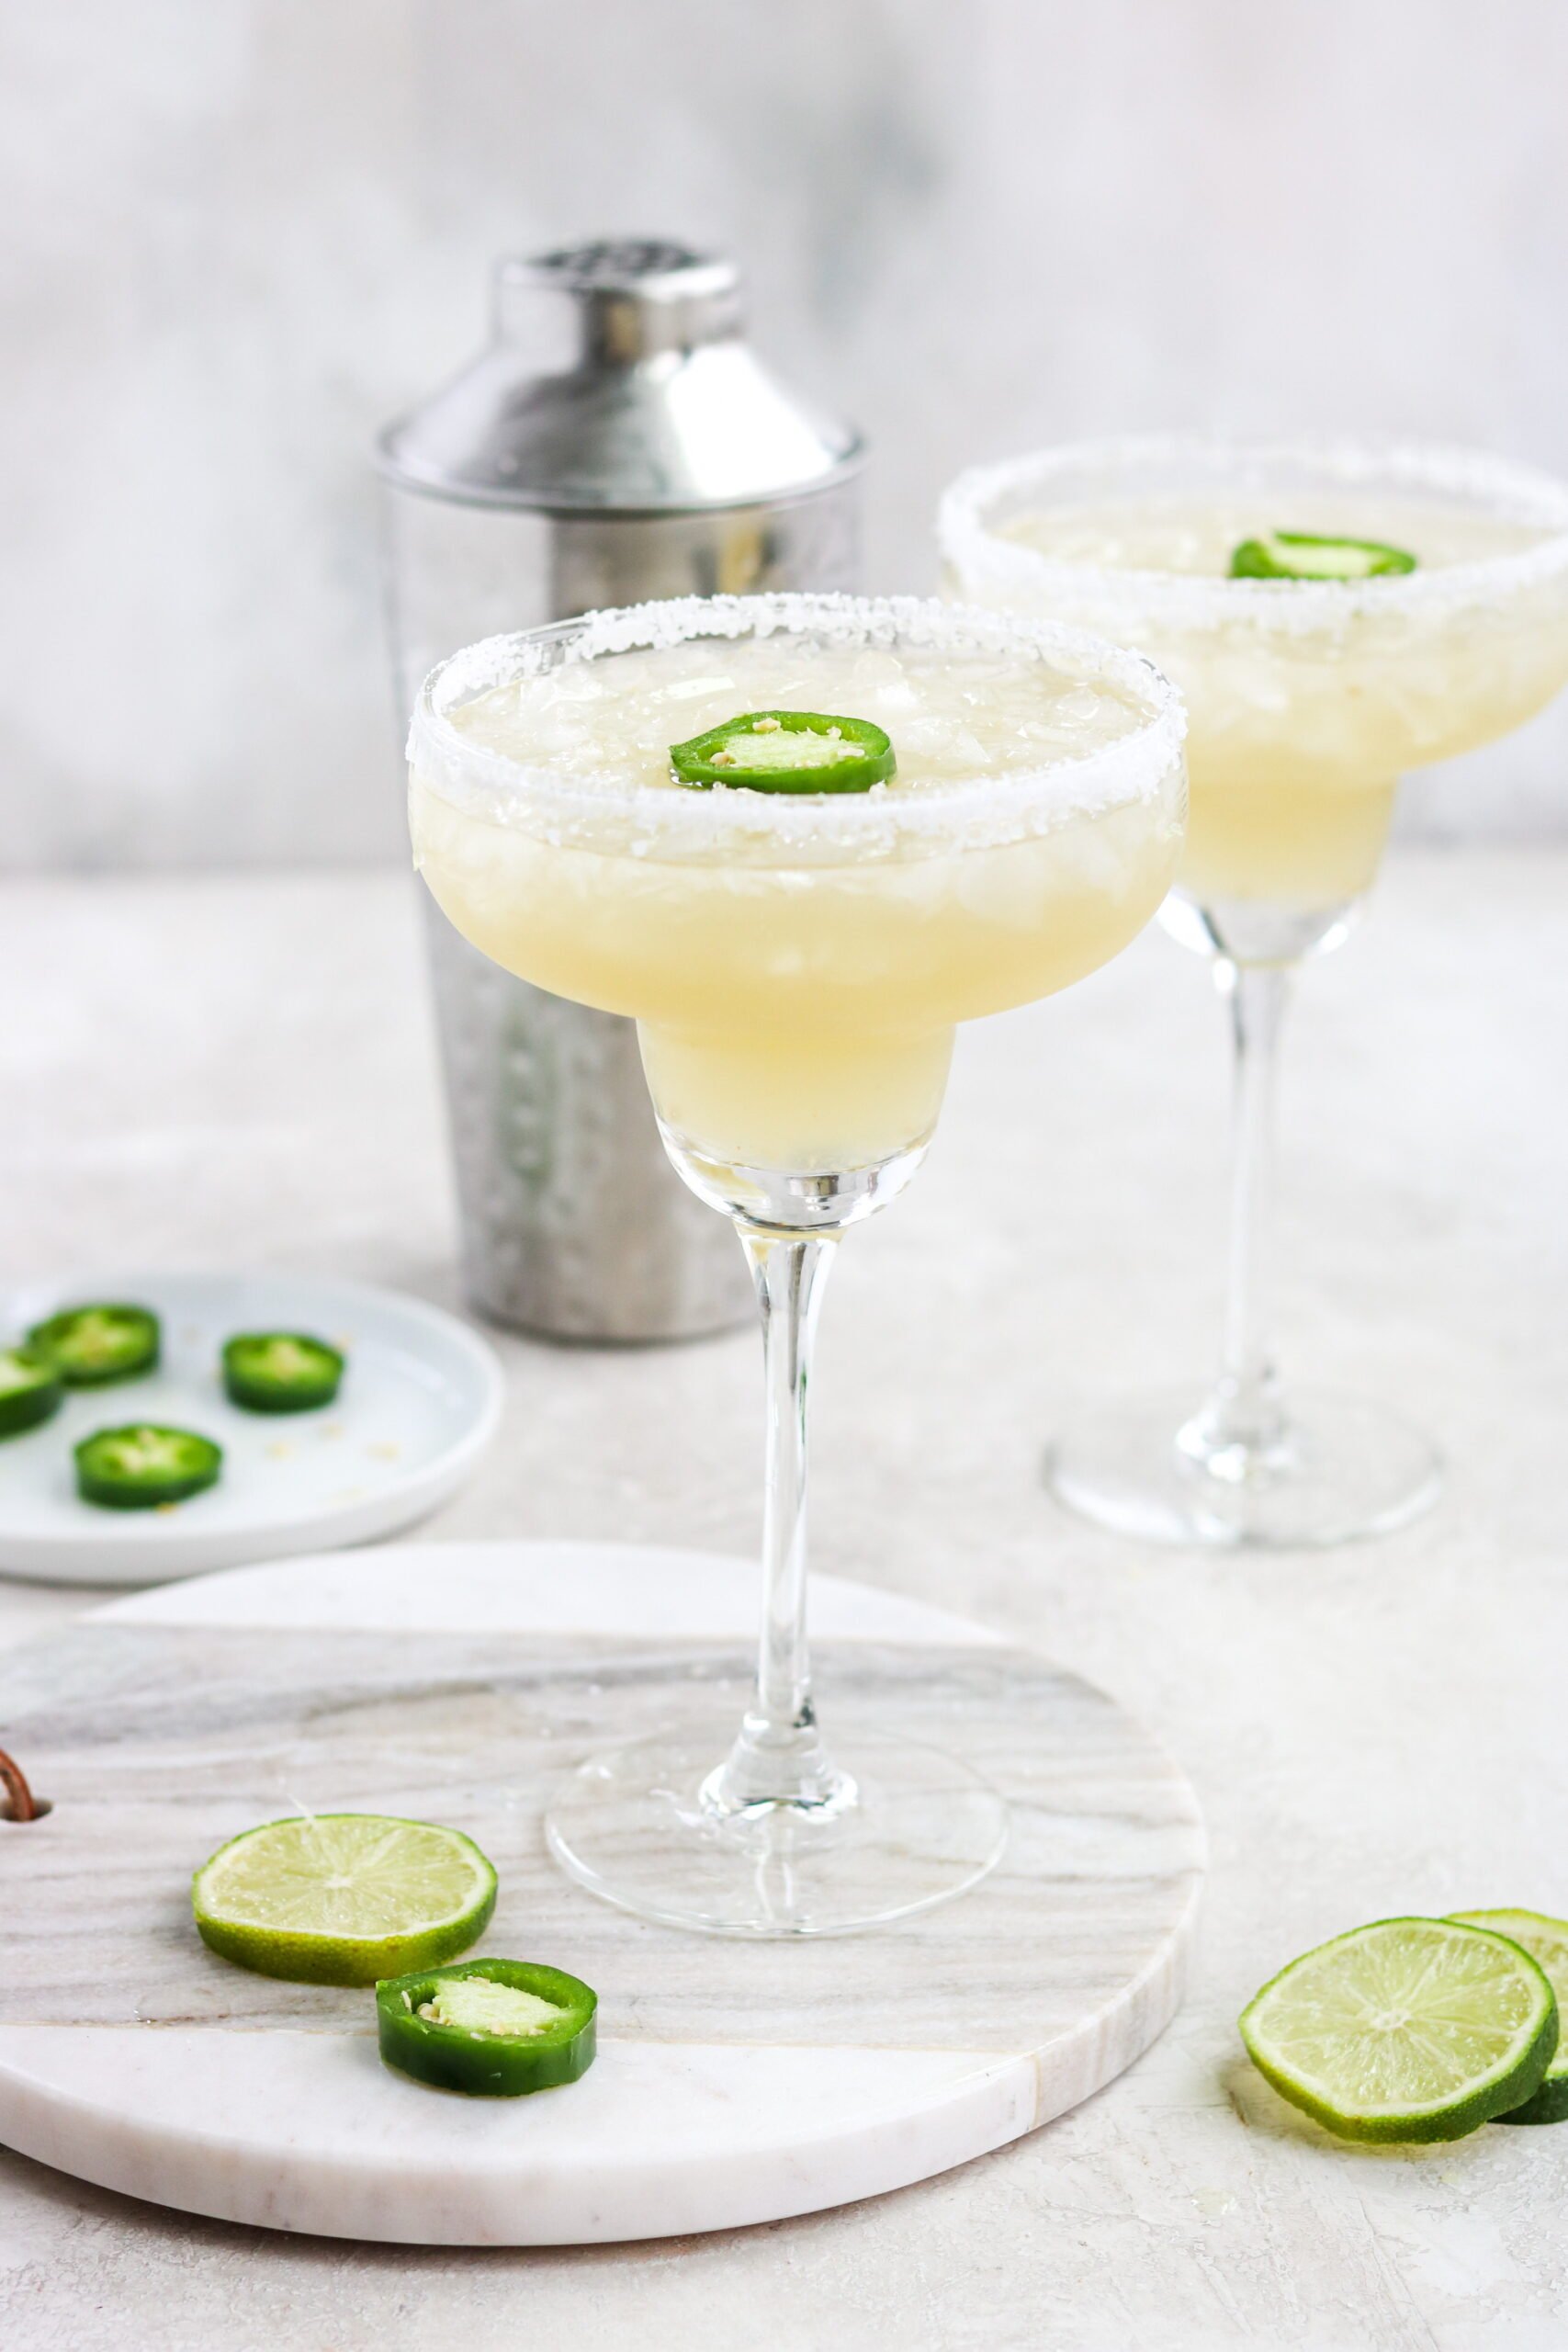 Spicy Skinny Margaritas with salt, jalapeno slices, and lime with a shaker in the background